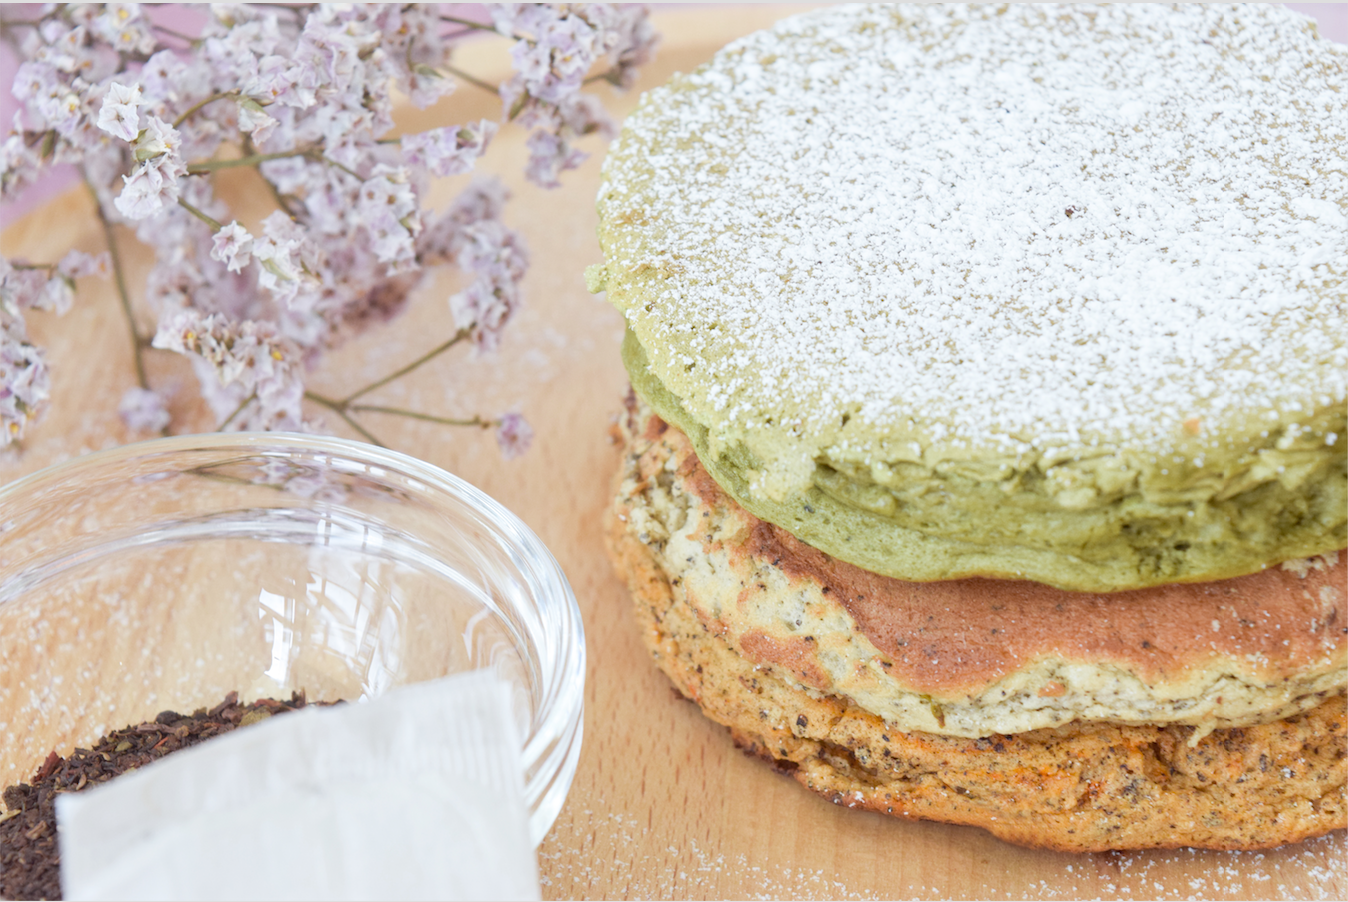 RECIPE: Sink your teeth into this stack of fluffy Thai Tea, Matcha & Earl Grey pancakes